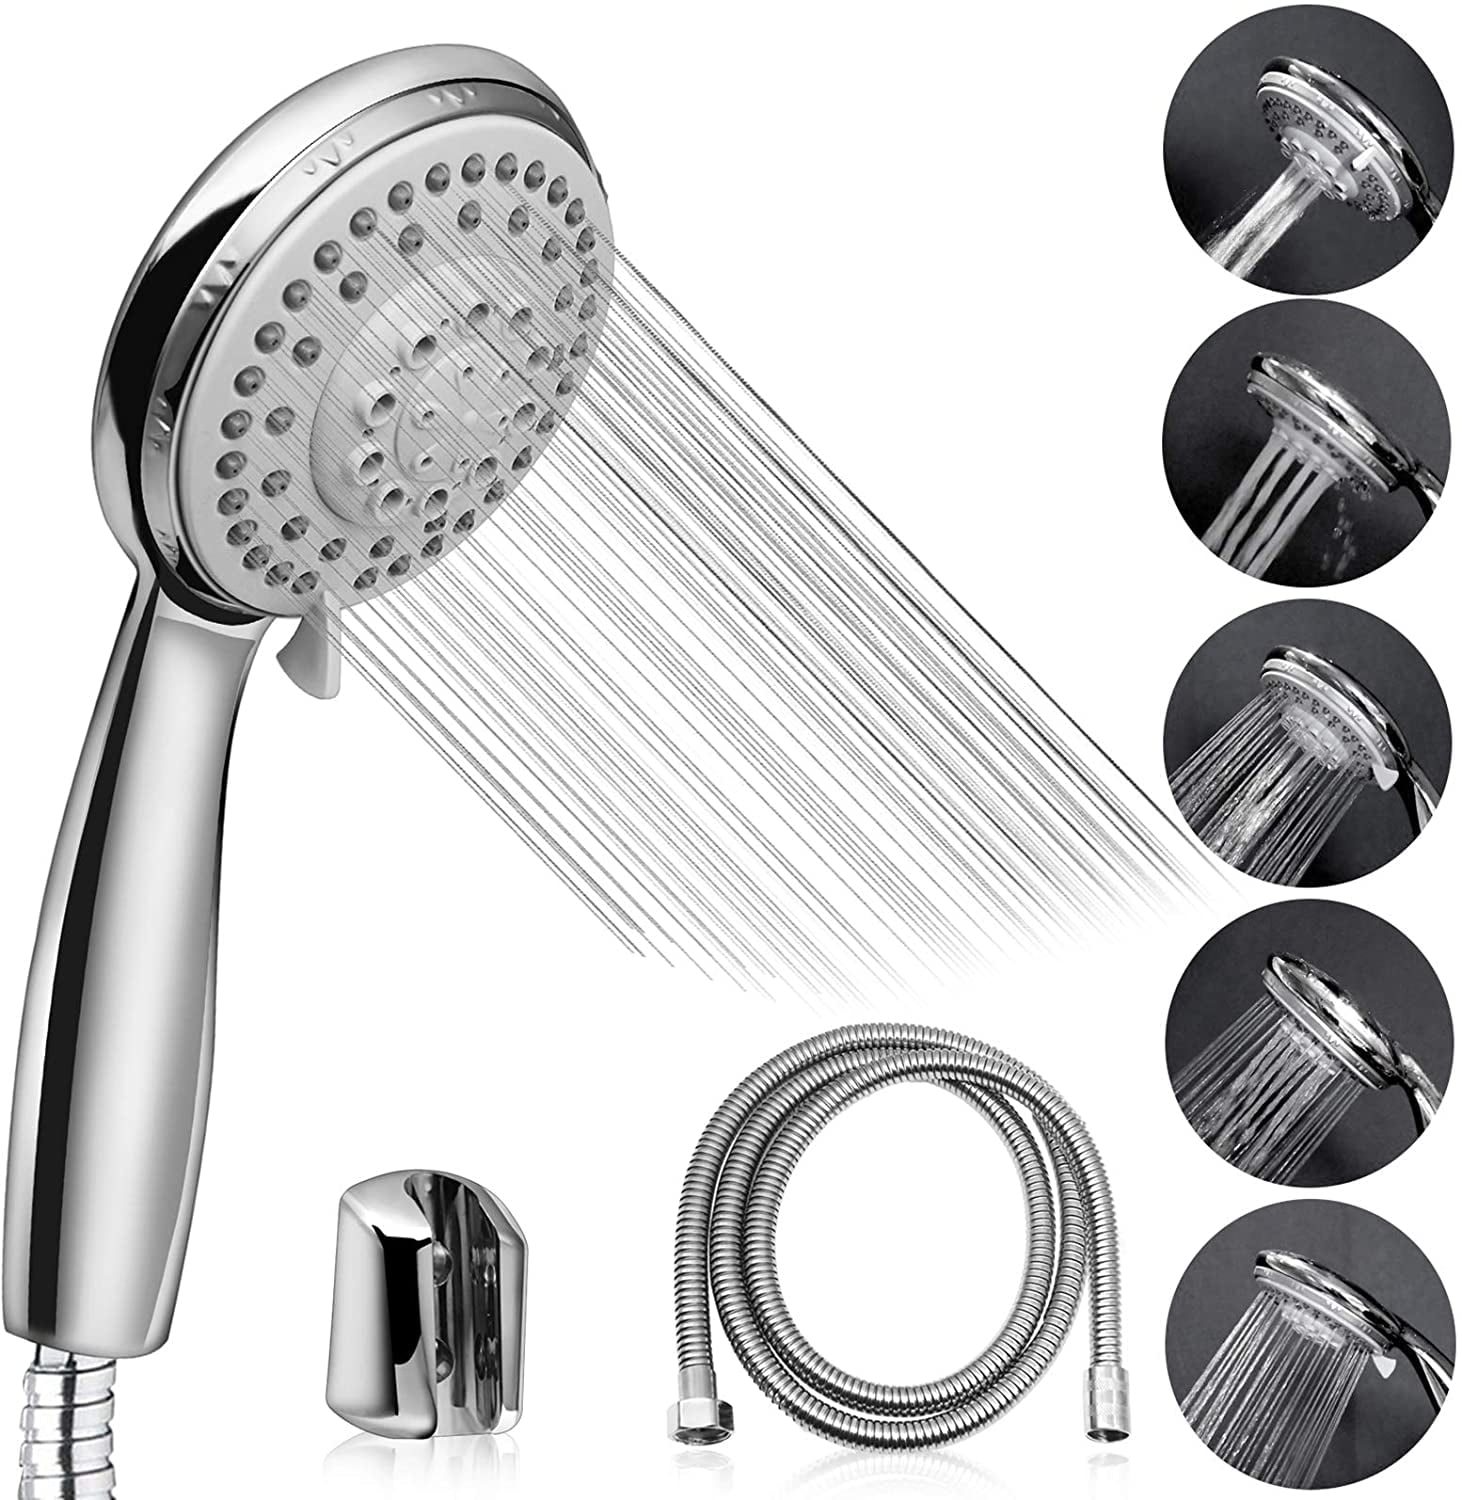 New Arrival ABS Rainfall Shower Head Fixed Rotatable Type Bath Product Tool 